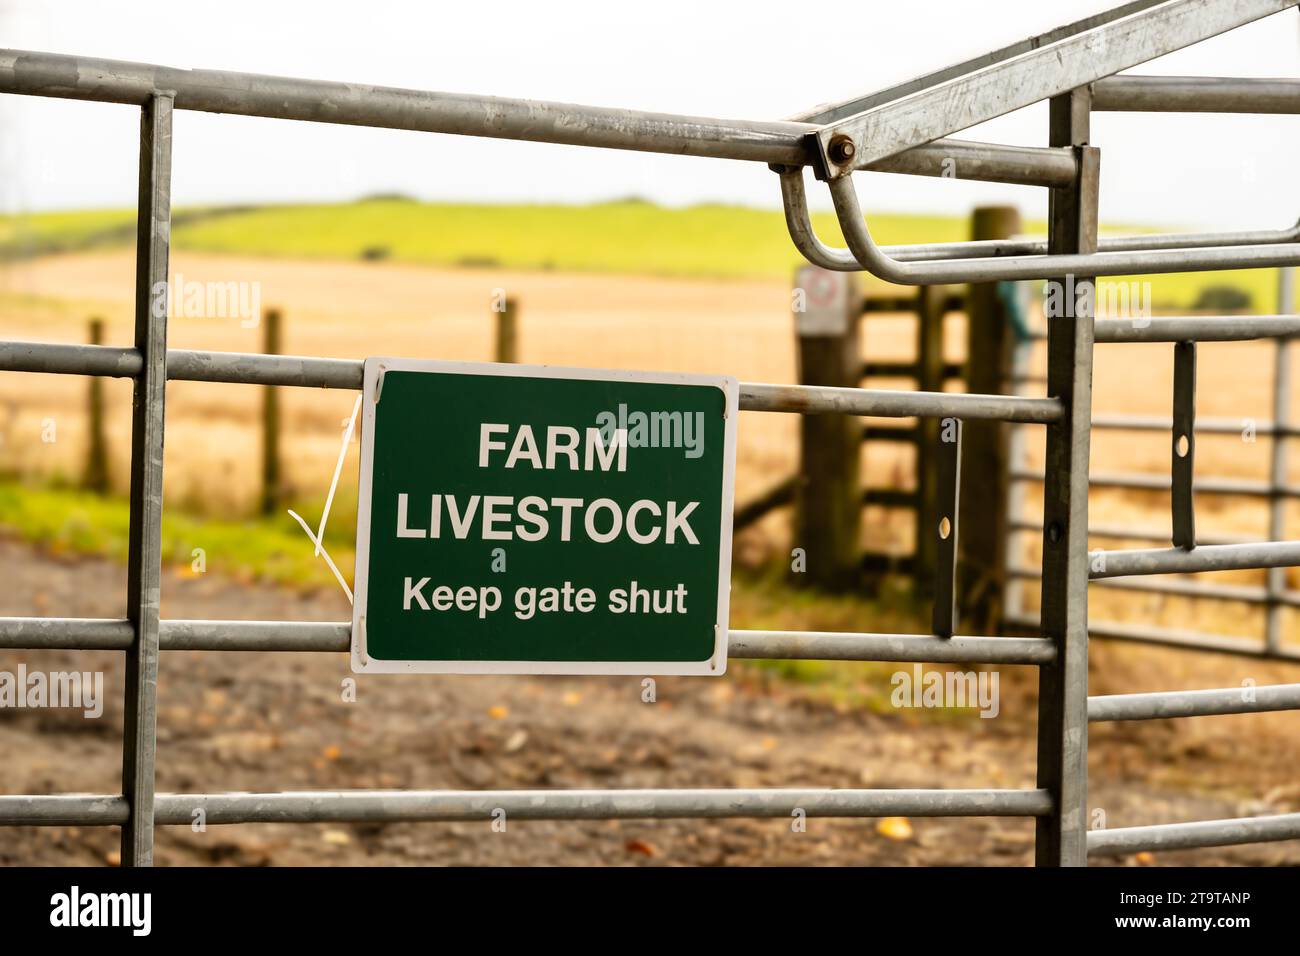 Farmers metal gate with a keep gate shut sign attached, displaying Farm Livestock, with agricultural fields in the background Stock Photo